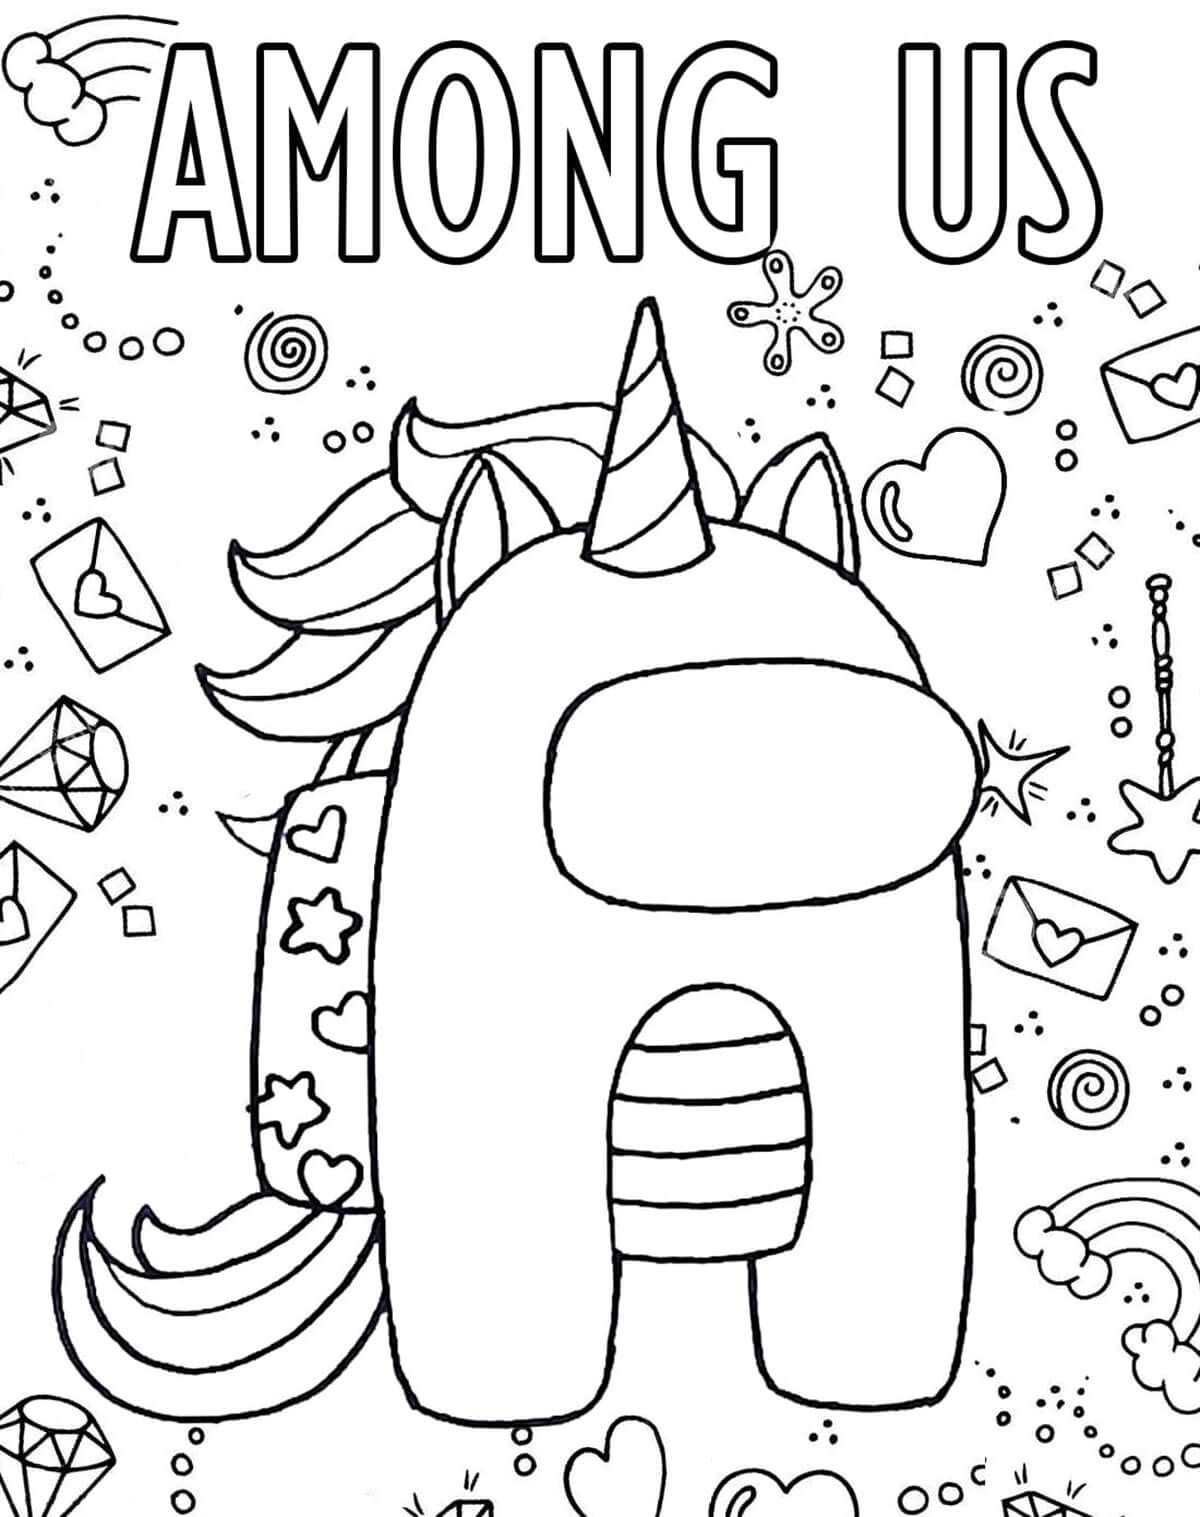 among us 9 coloring page free printable coloring pages for kids